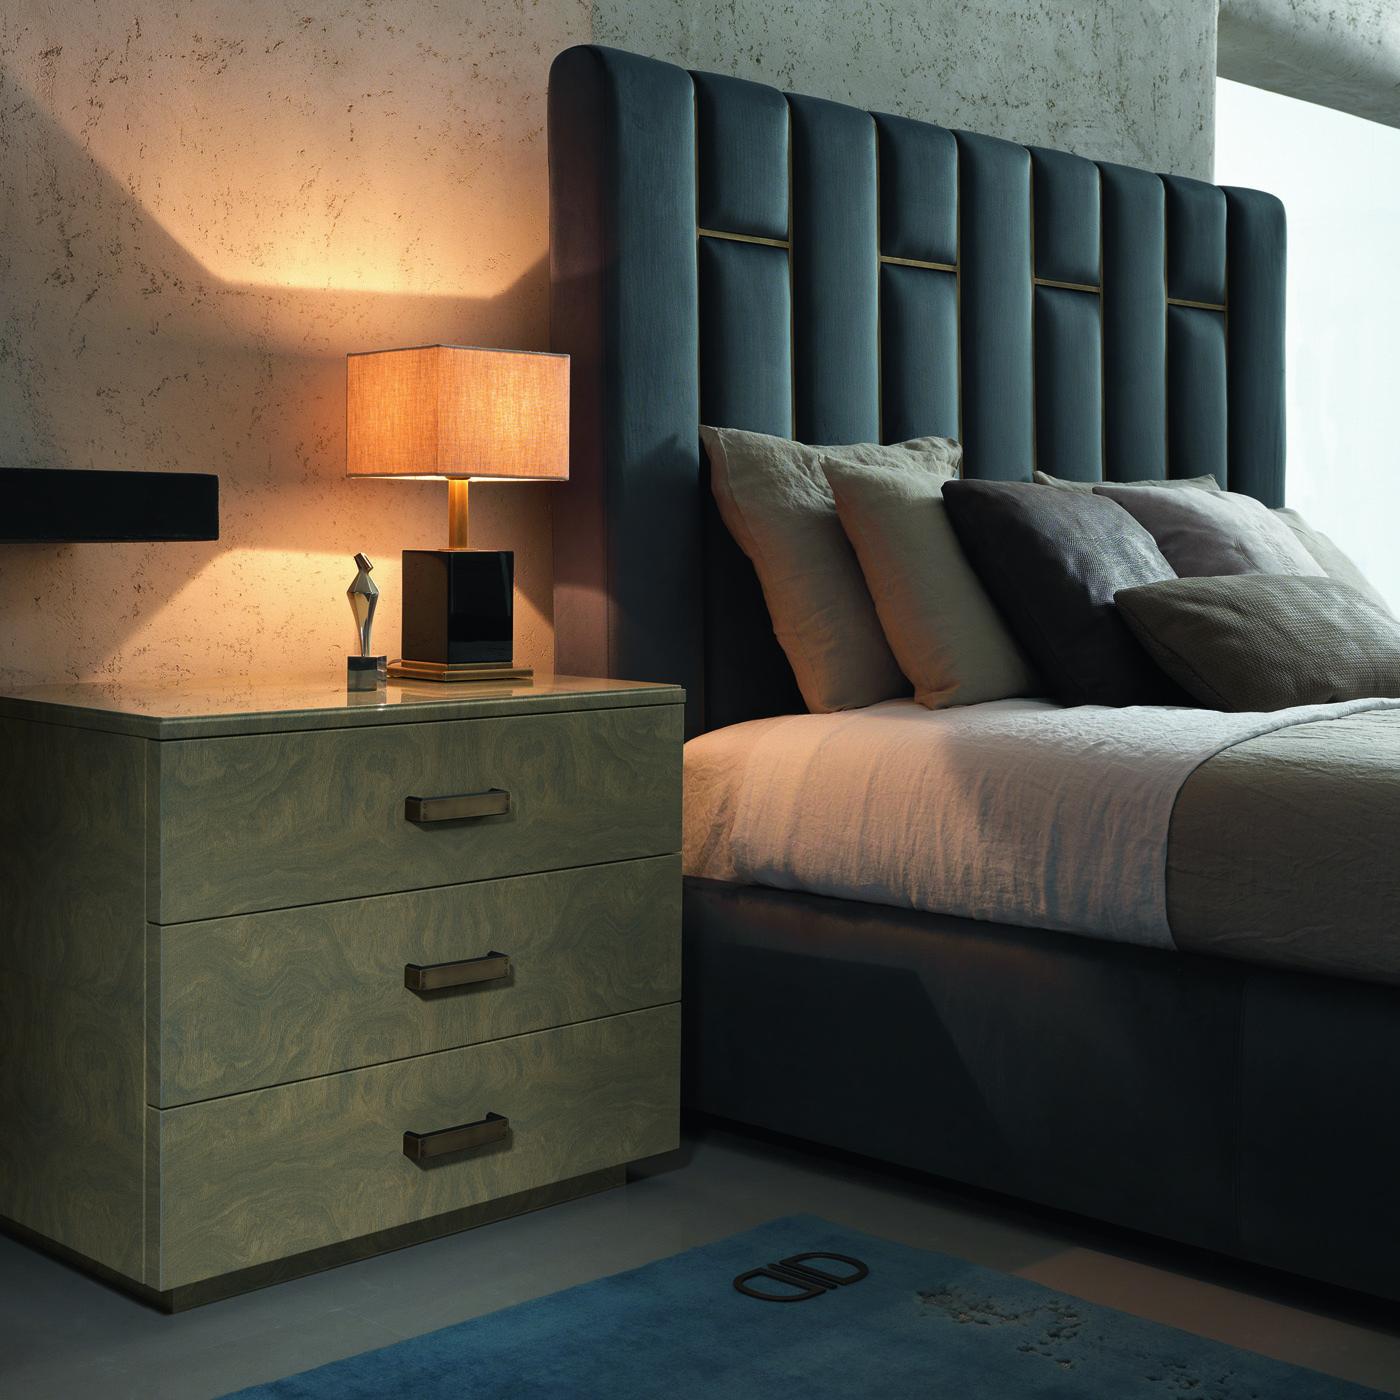 The elegant Loft 3-drawer side table makes a stylish addition to your bedroom furnishings. With a structure and top crafted from plywood, it is finished in a brushed gloss lacquer. The fully lined drawers and the brass base and handles in a